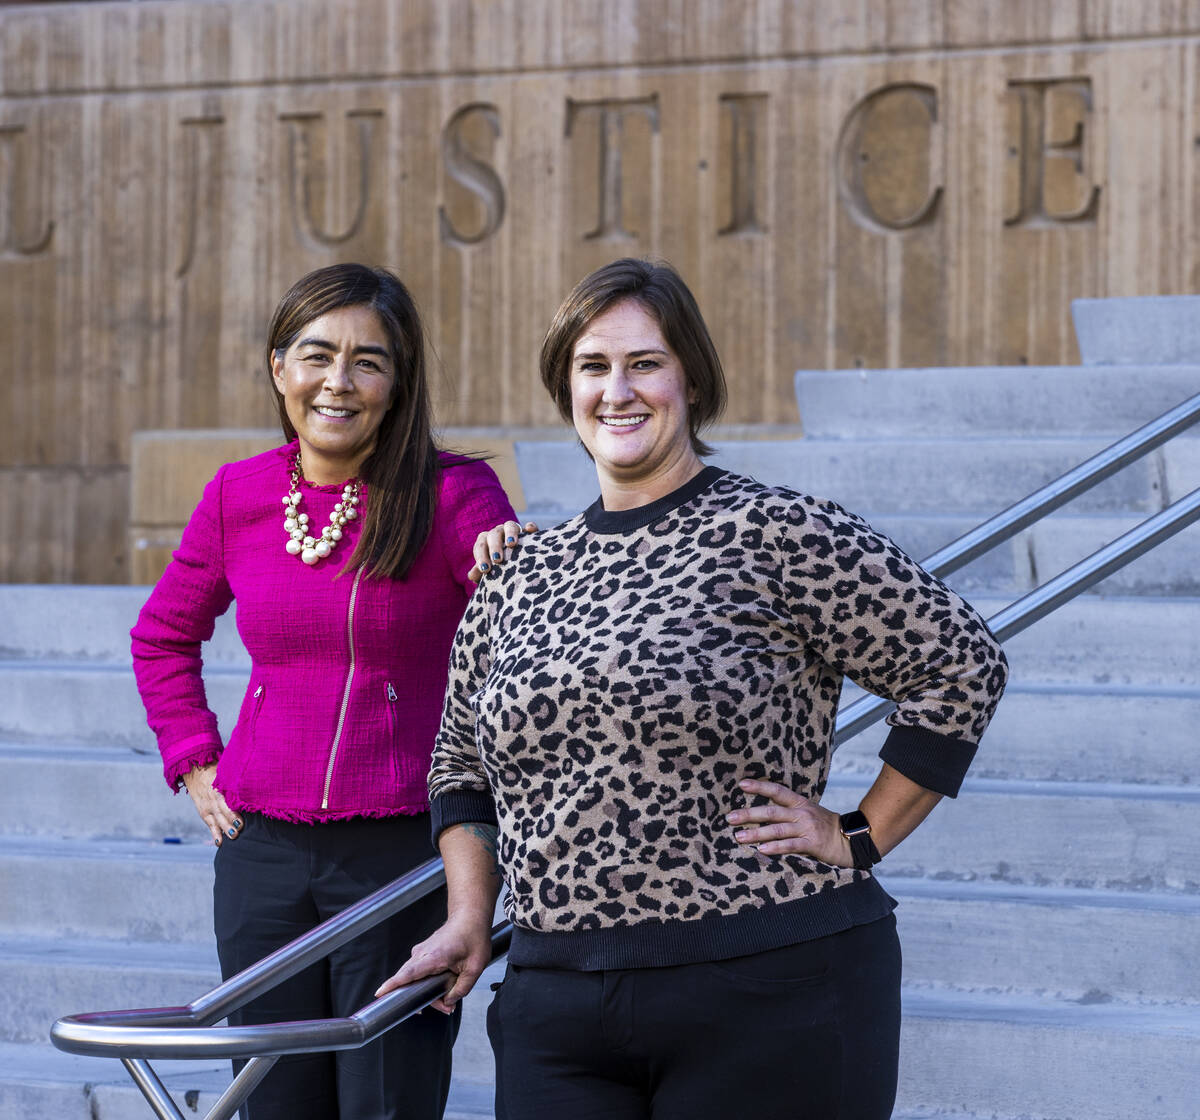 District Judge Bita Yeager, left, and Caitlin Mroz, the mental health court coordinator, at the ...